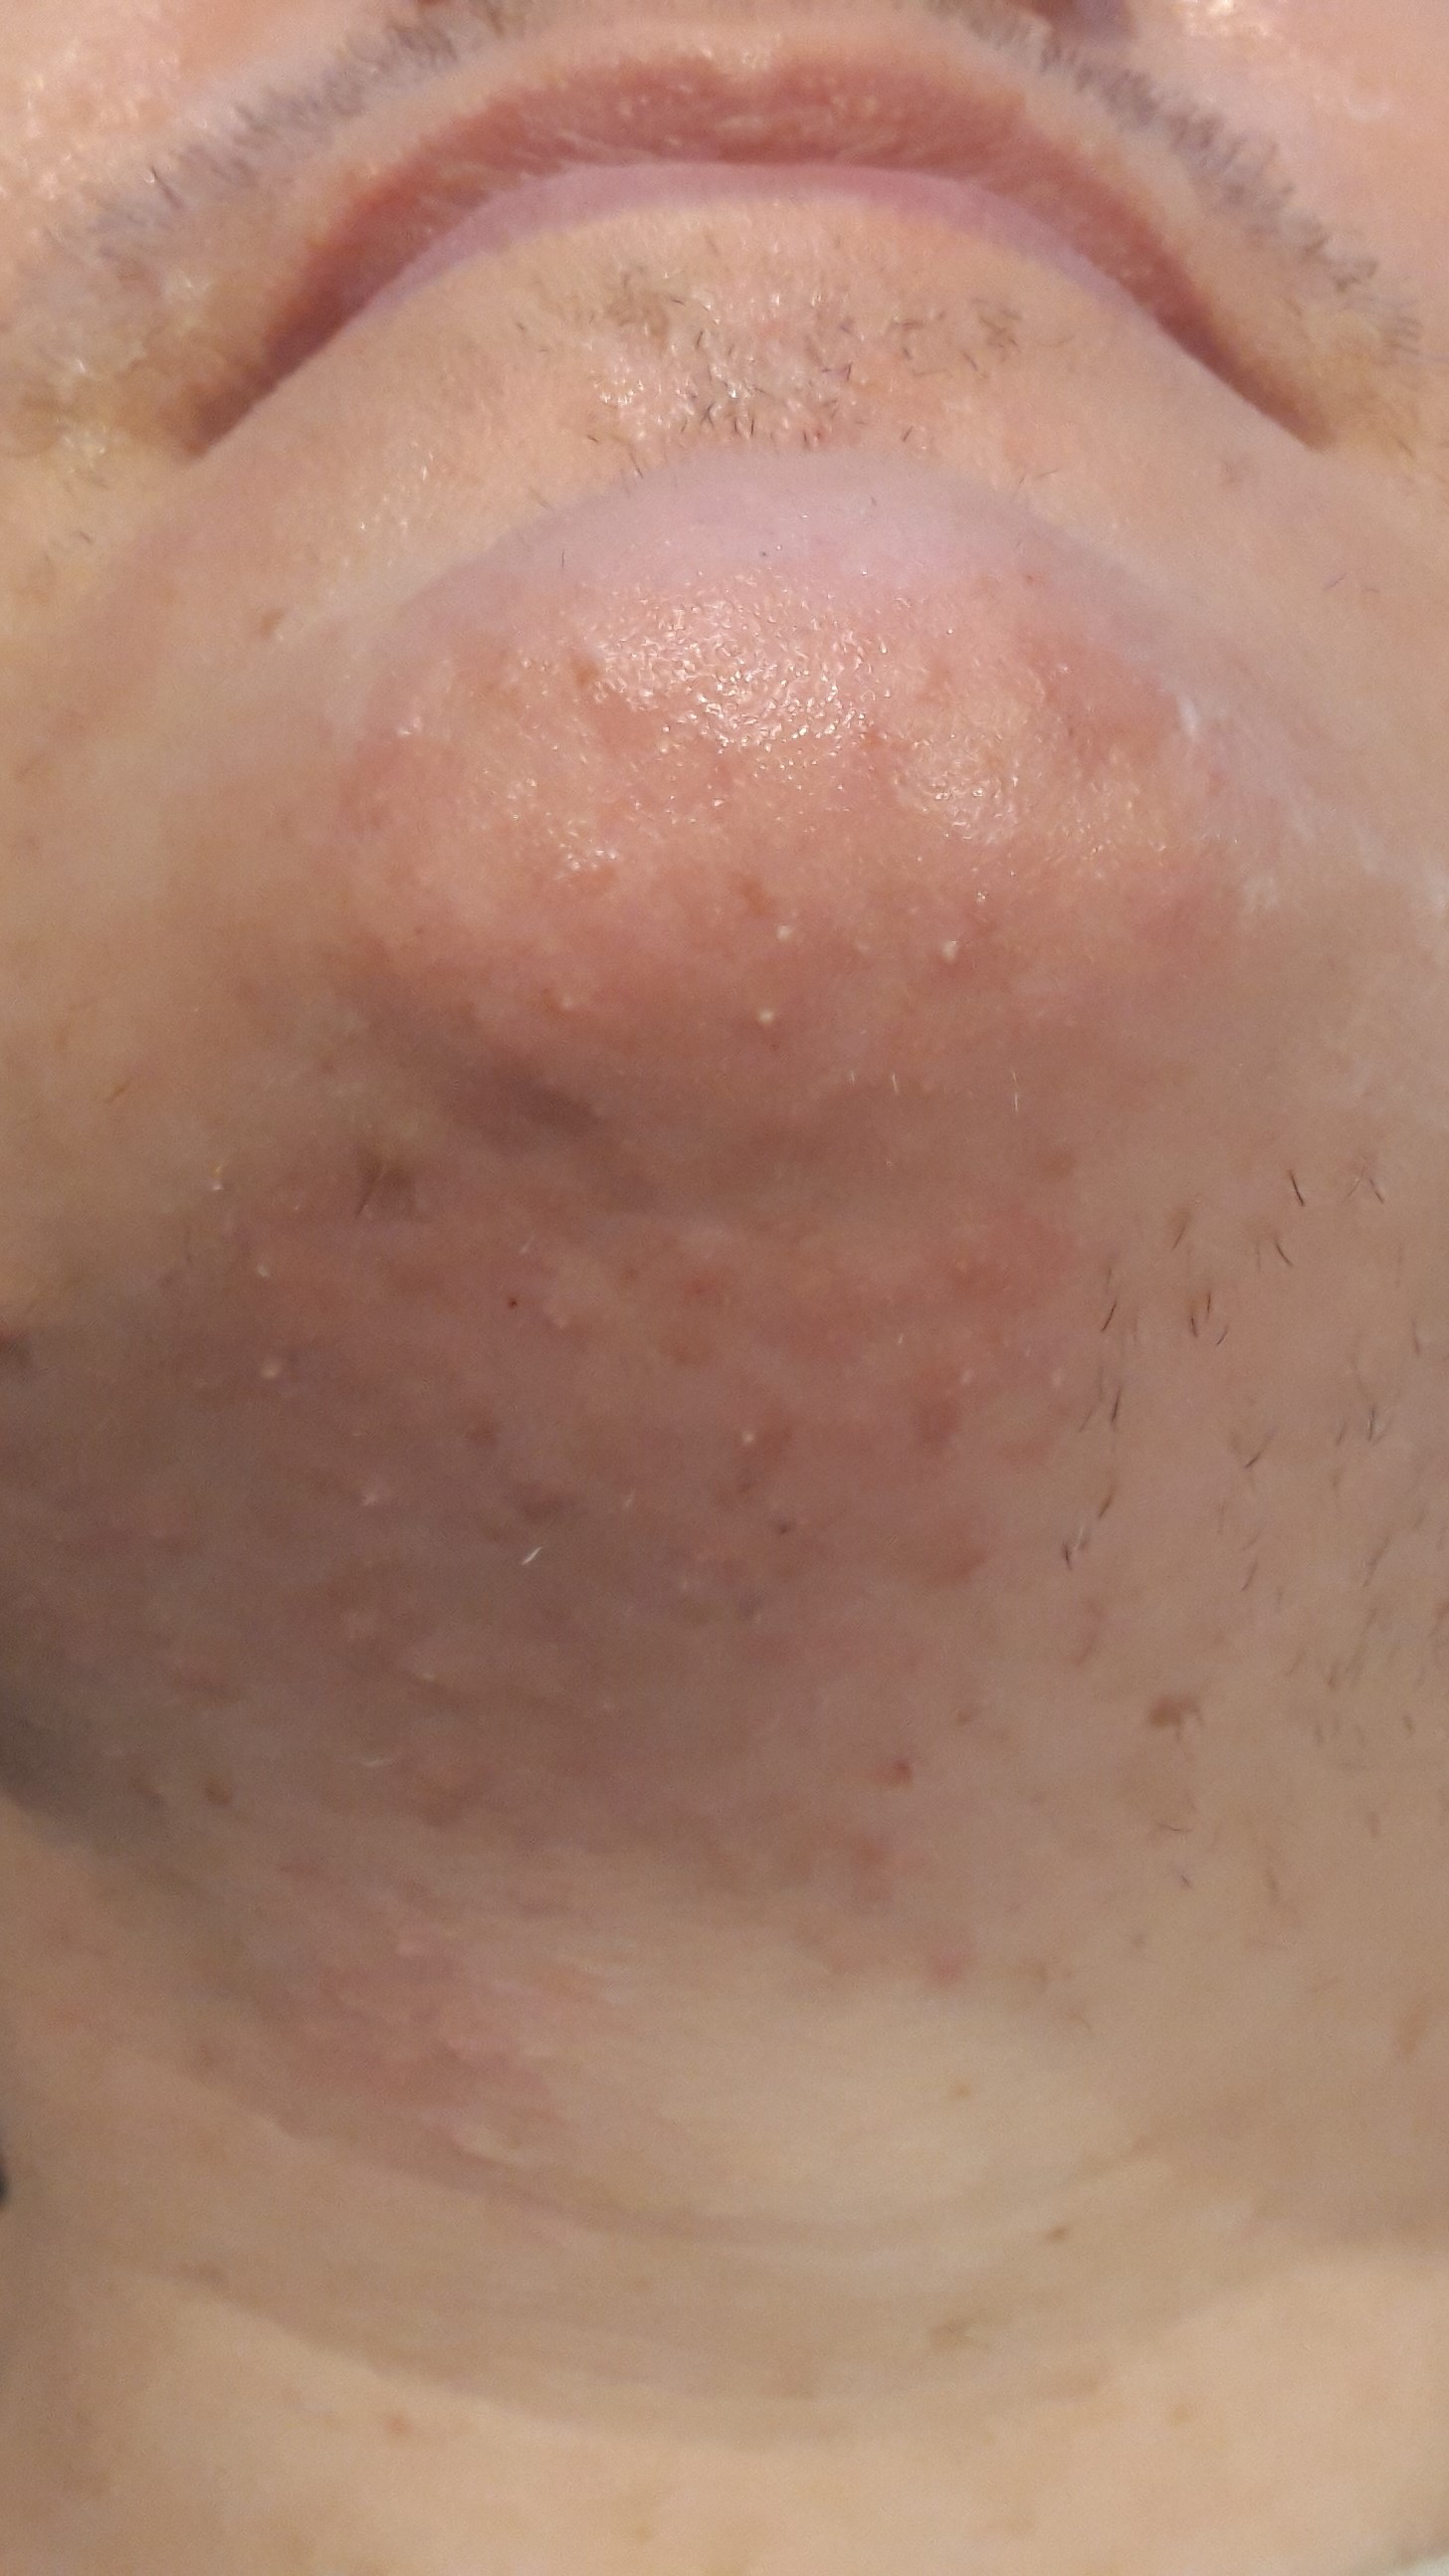 Image of Electrolysis Hair Removal on the chin and neck